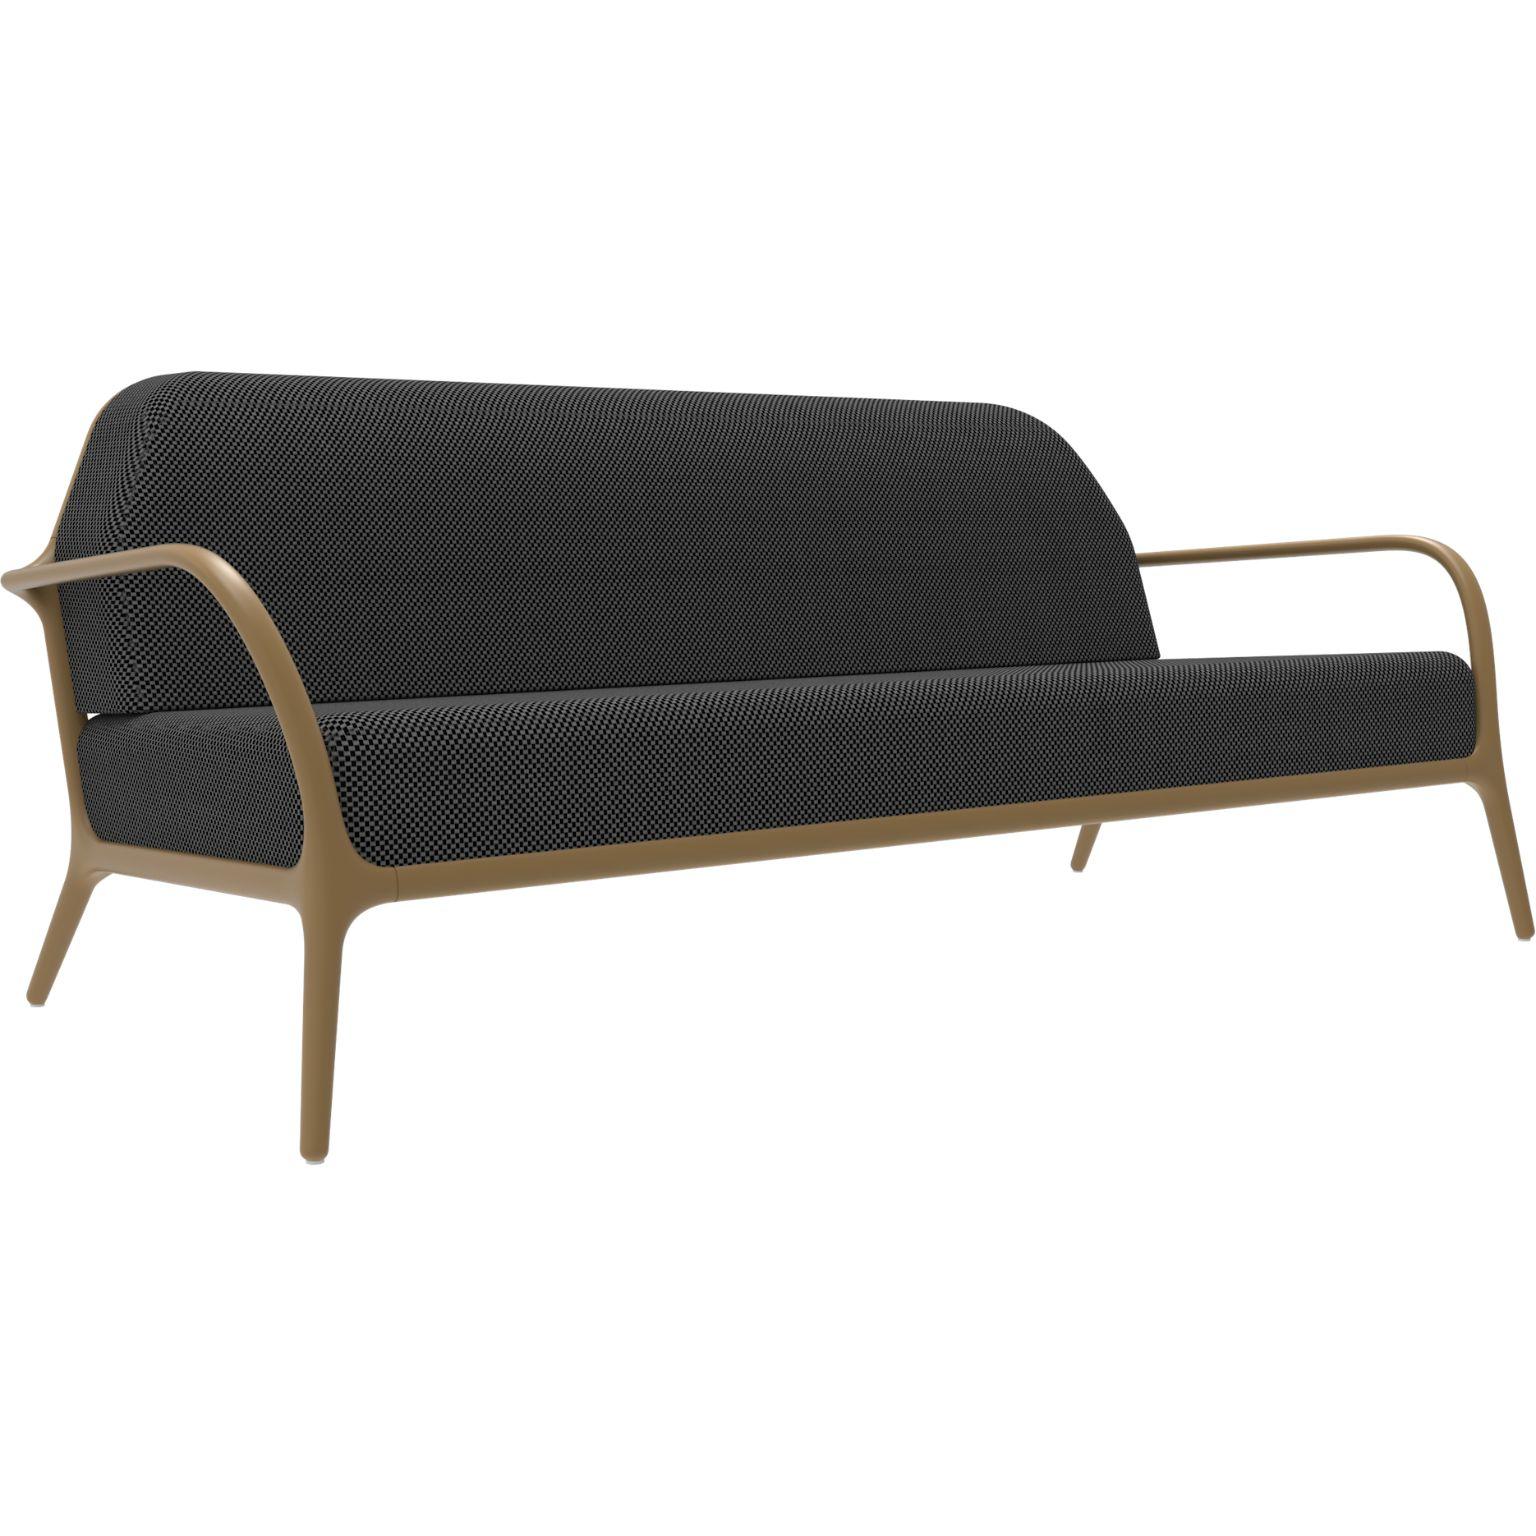 Xaloc gold sofa by MOWEE
Dimensions: D100 x W200 x H81 cm (Seat Height 42 cm)
Material: Aluminum, Textile
Weight: 46 kg
Also Available in different colors and finishes.

 Xaloc synthesizes the lines of interior furniture to extrapolate to the